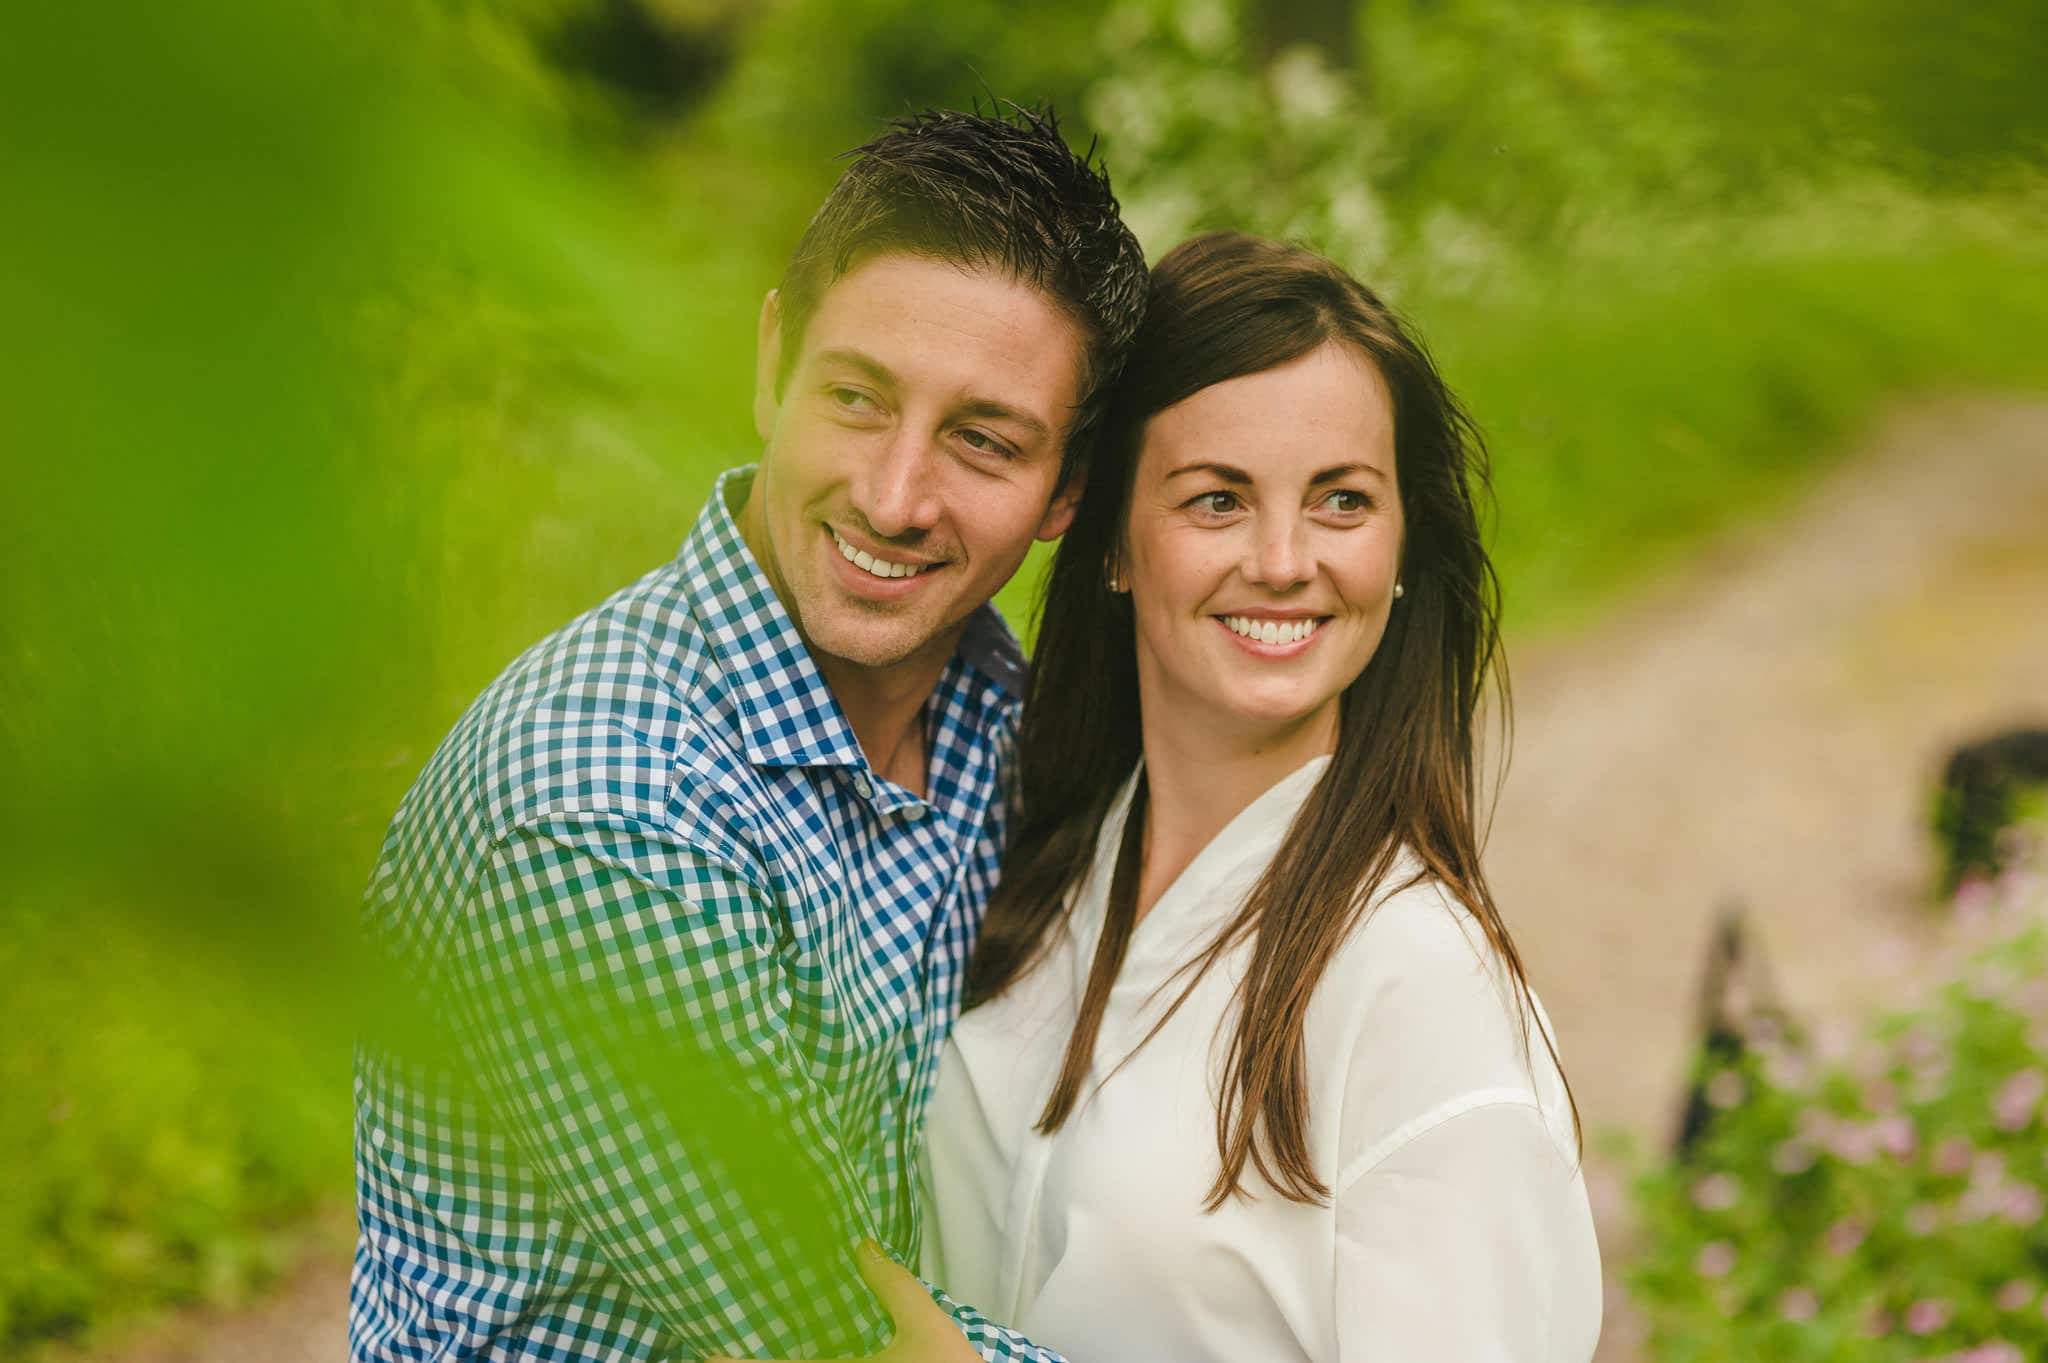 Dean + Sarah's pre wedding photography session in Herefordshire, West Midlands 16